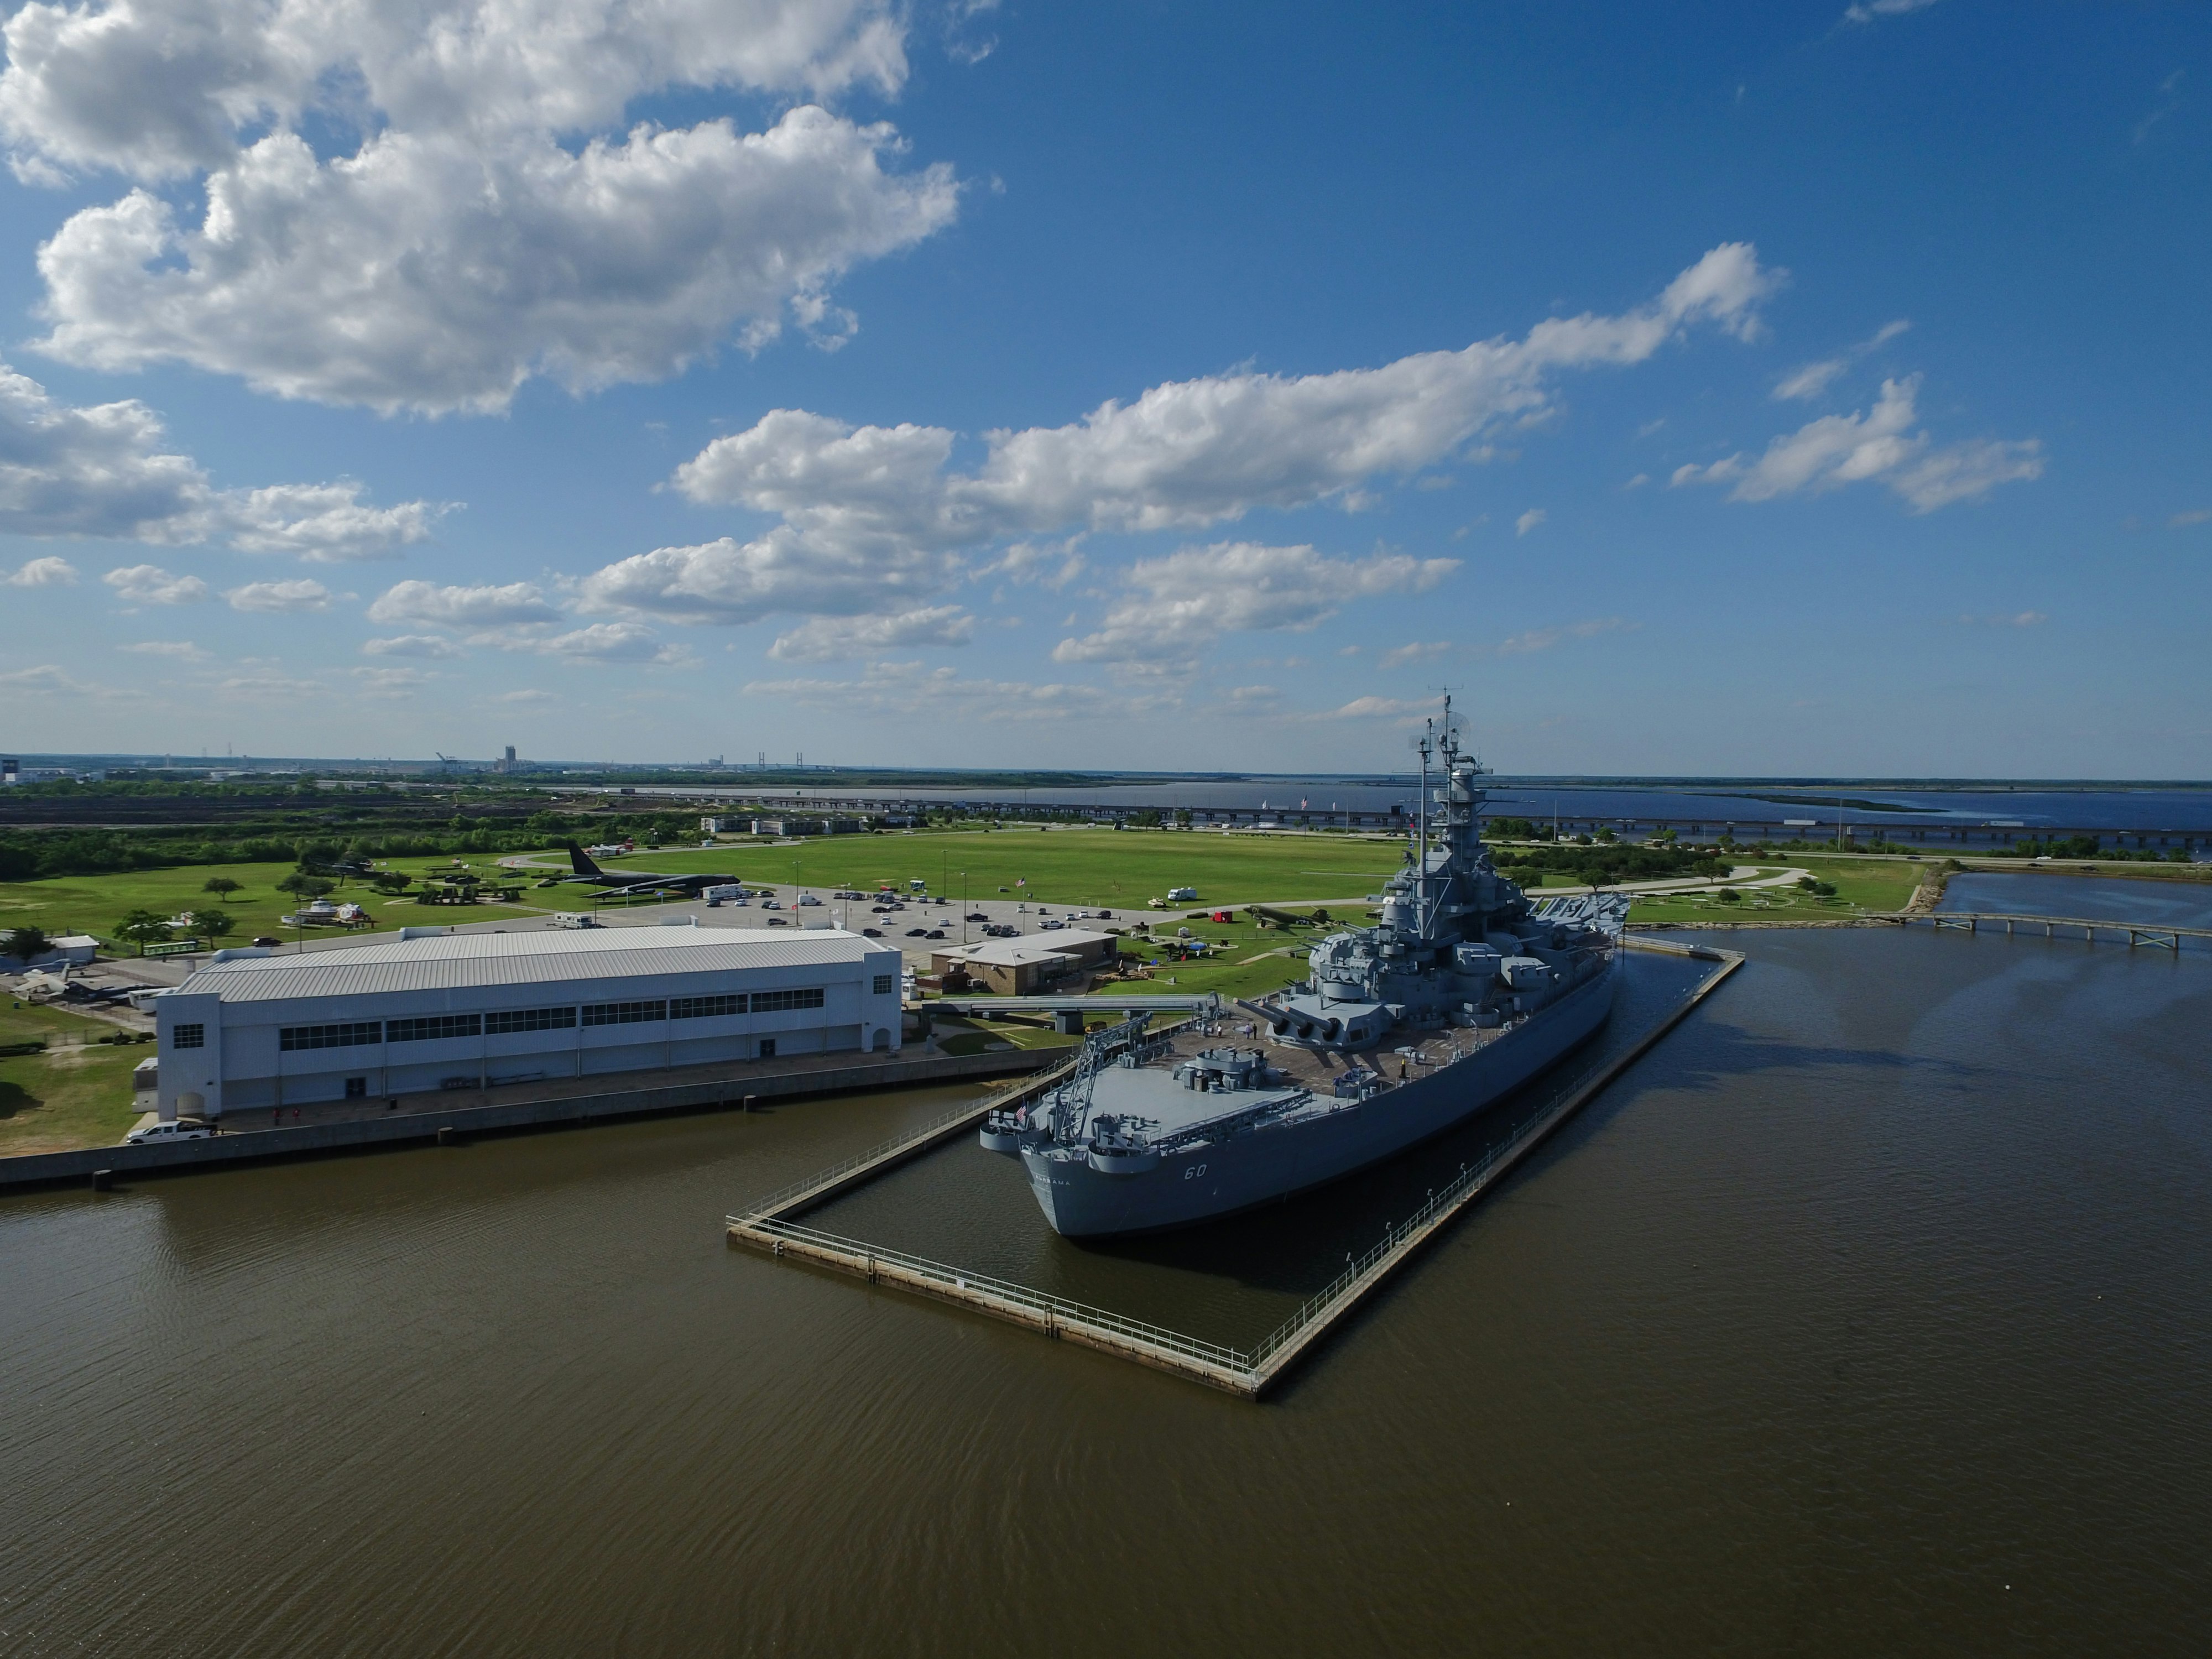 USS Alabama at deck in Mobile, AL - Shot on DJI Phantom 3 Pro during my roadtrip across 17 states.

Jp Valery is one of the best photographers in Montréal, QC. He’s a self-taught photographer passionate by his craft. He’s available for hire - no projects are too big or too small - and can be contacted at contact@jpvalery.photo. 

His pictures have received almost 20M views on Unsplash where he has been nominated Community Allstar for 2 years in a row.

Don’t hesitate to contact Jp Valery if you’re looking for a talented photographer in Montreal, Quebec with great photography services.